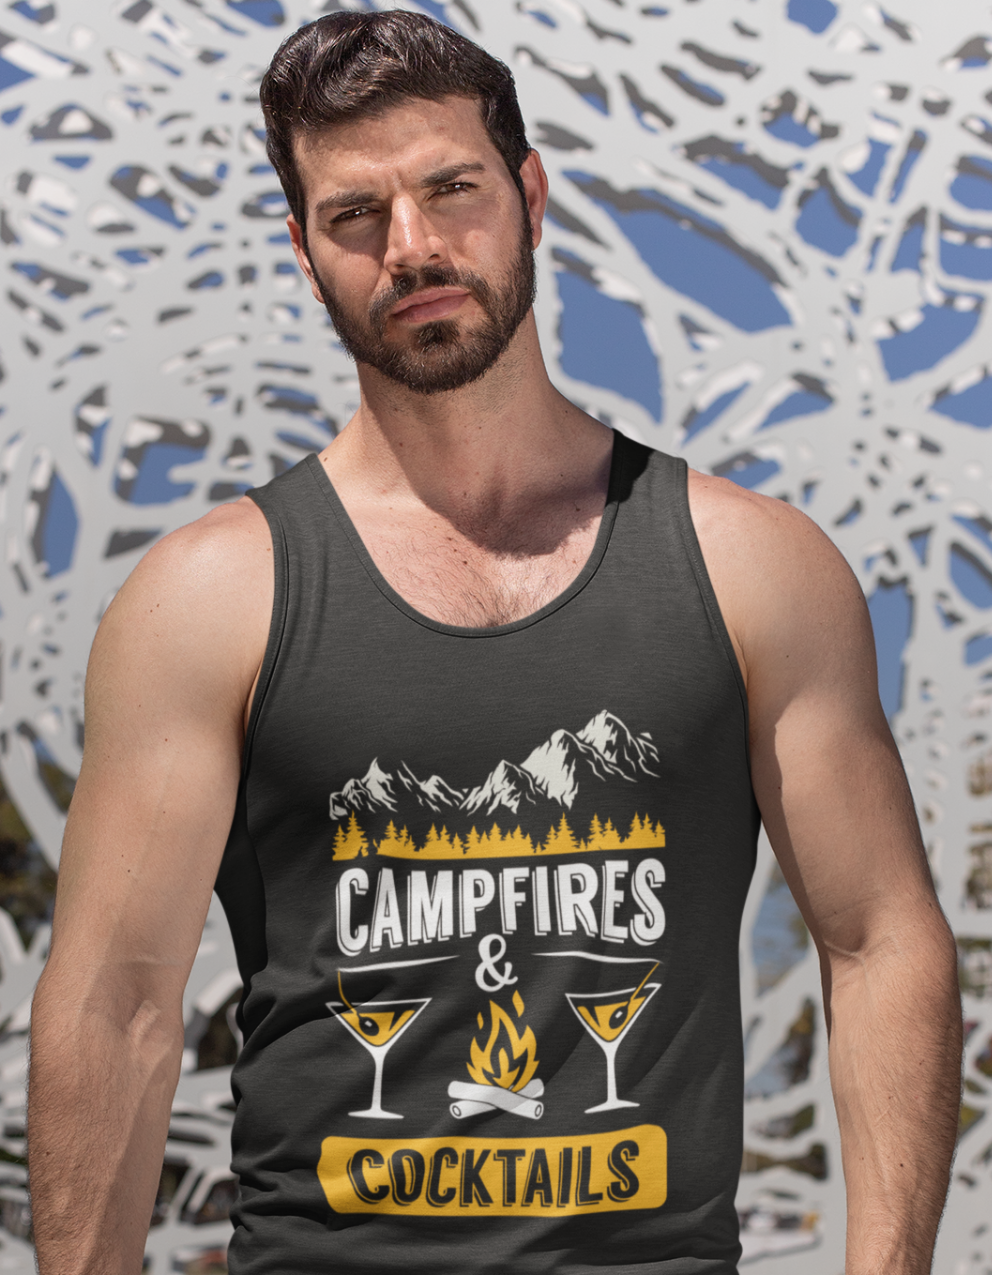 Campfires & Cocktails; Soft 100% cotton tank top. Removable tag for comfort